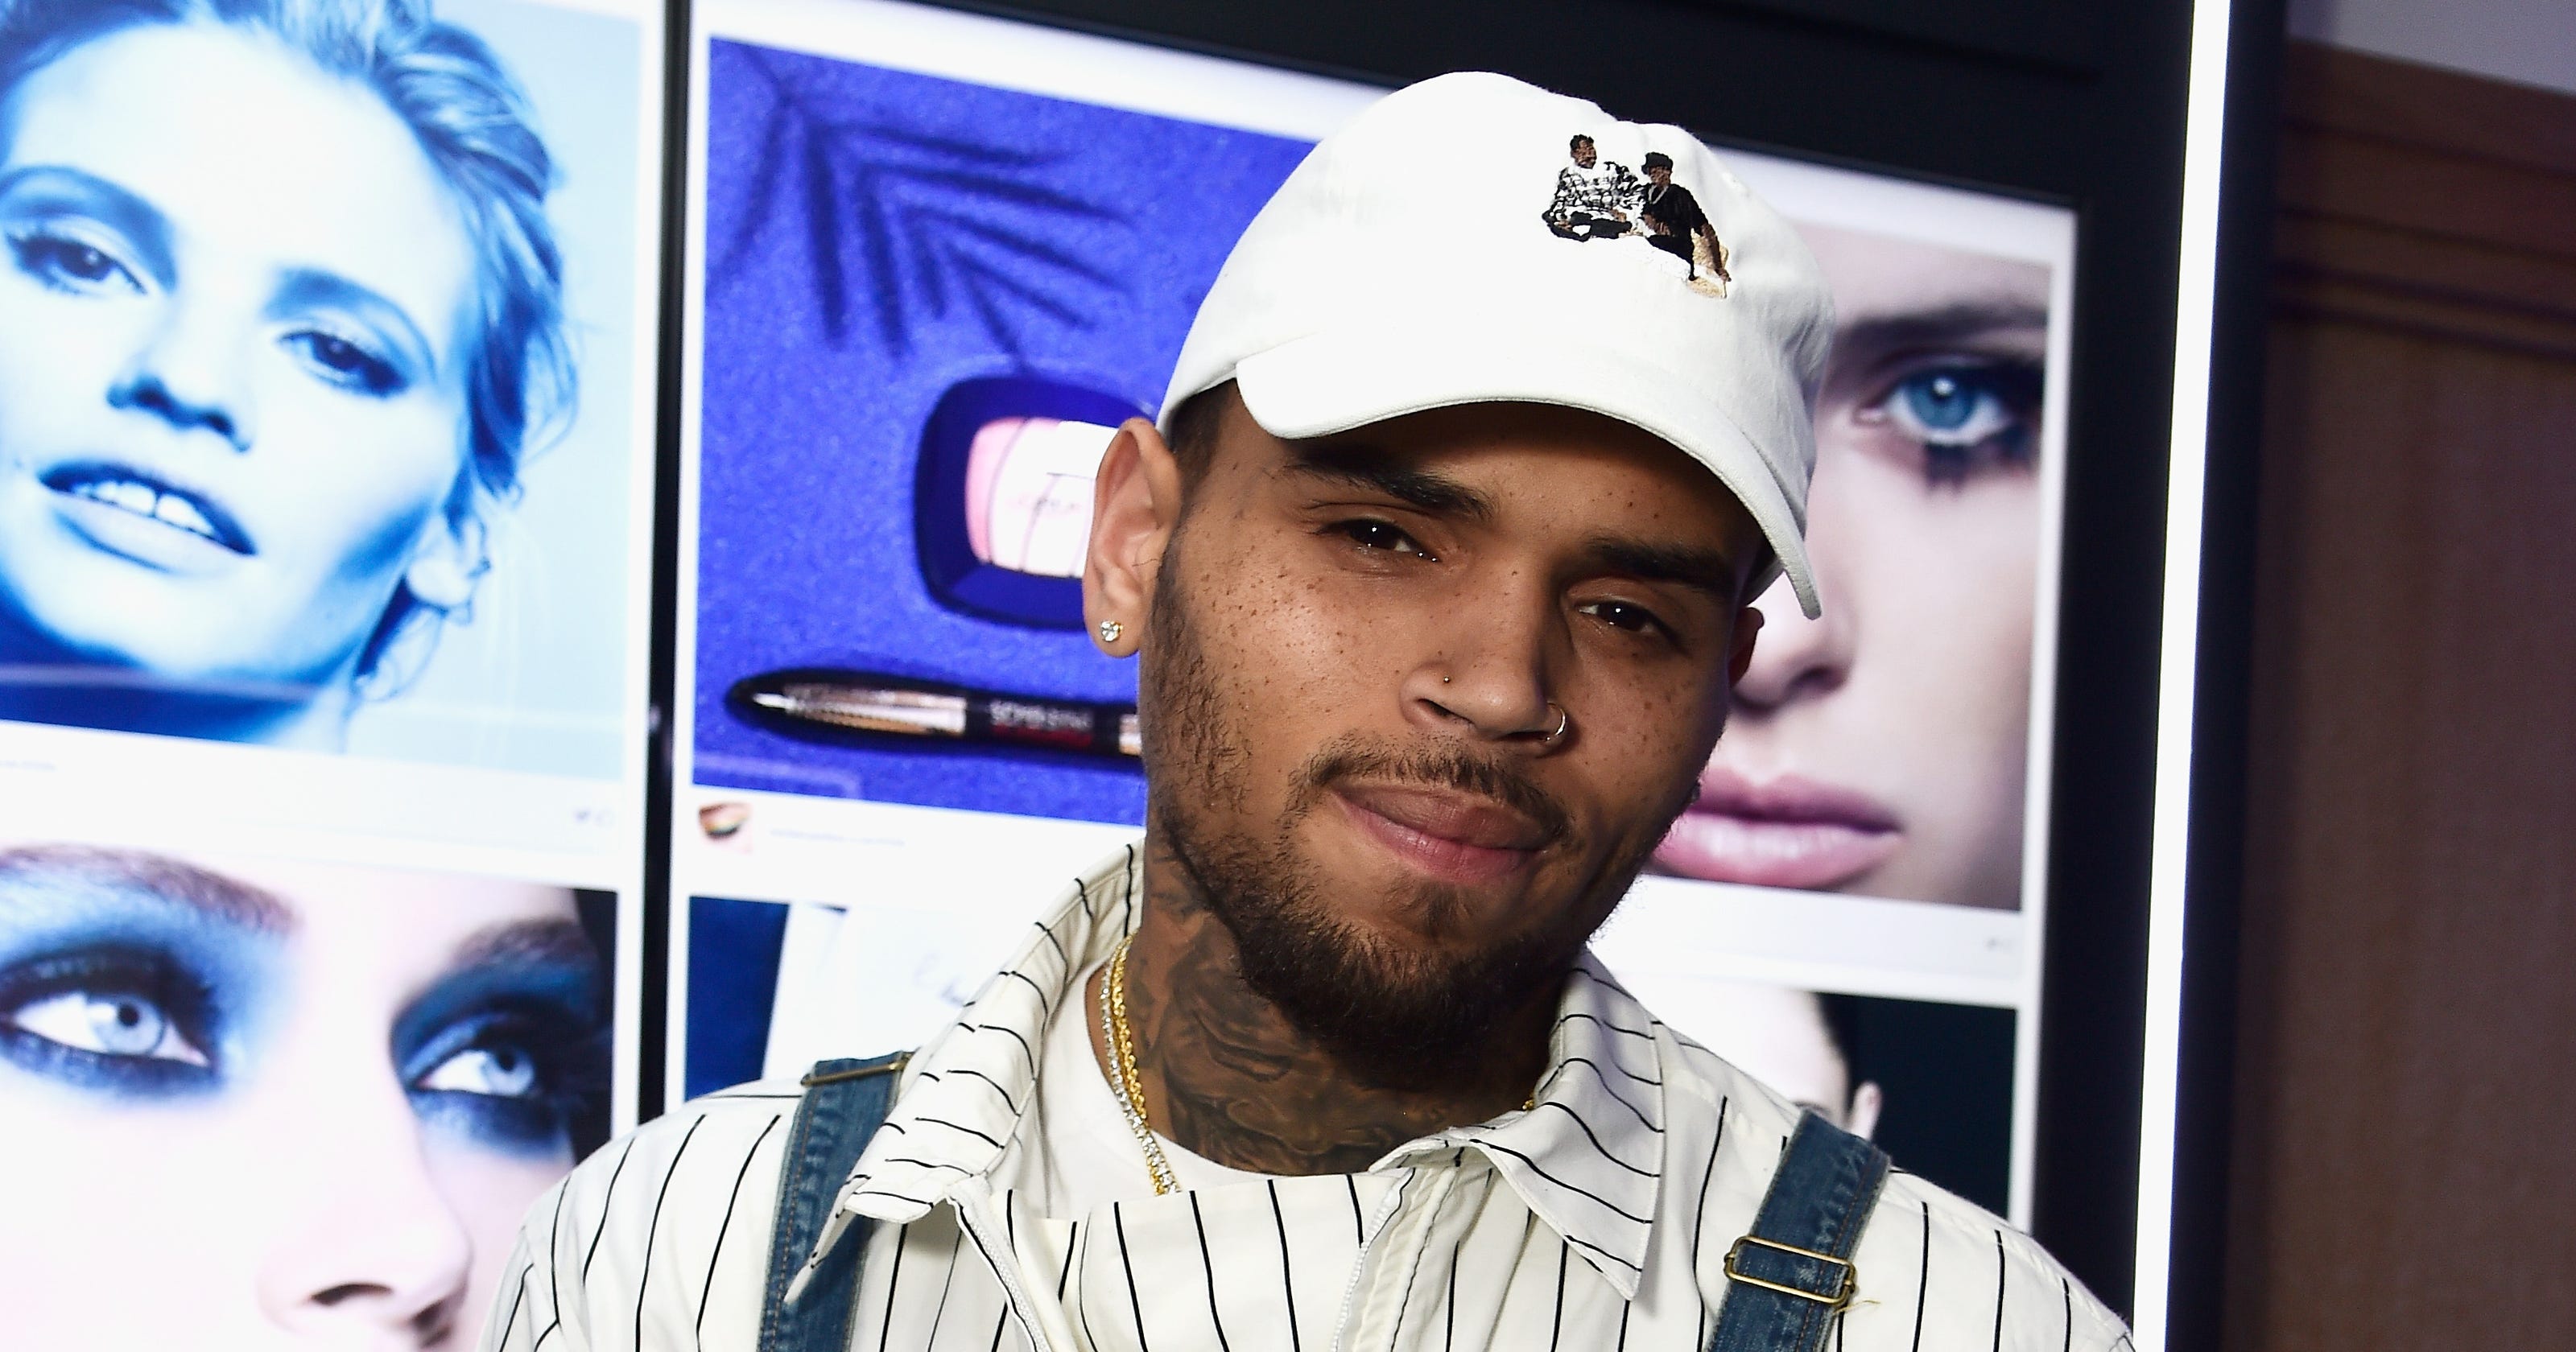 Chris Brown's exmanager sues, claims 'brutal' attack